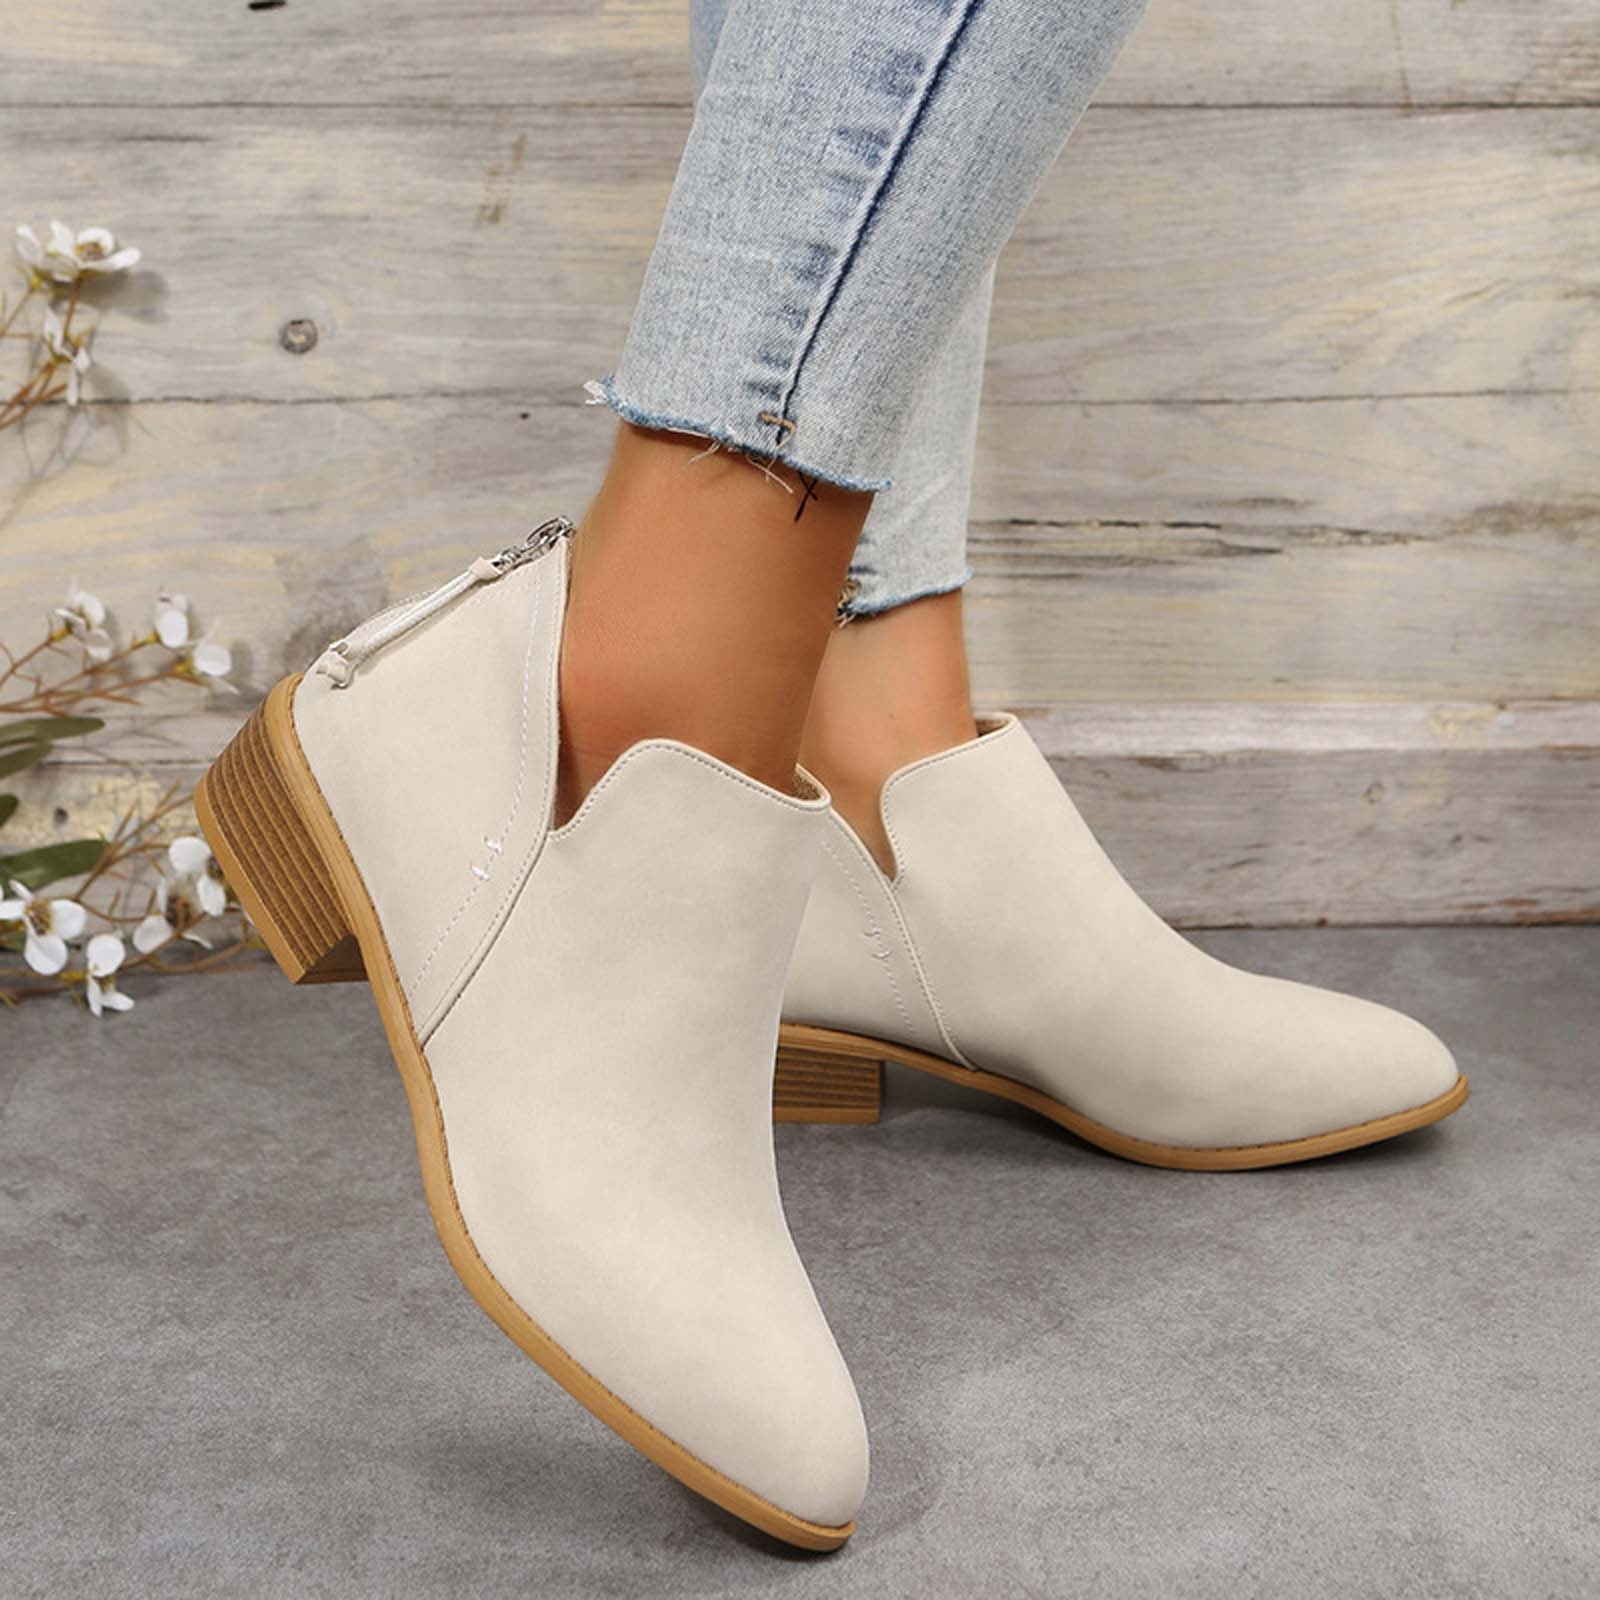 archief Crack pot foto Dezsed Women's Low-heeled Ankle Boots Winter Boots Chunky Heel Low Heel  Pointed Toe Boots Back Zipper Shoes Beige 43 on Clearance - Walmart.com